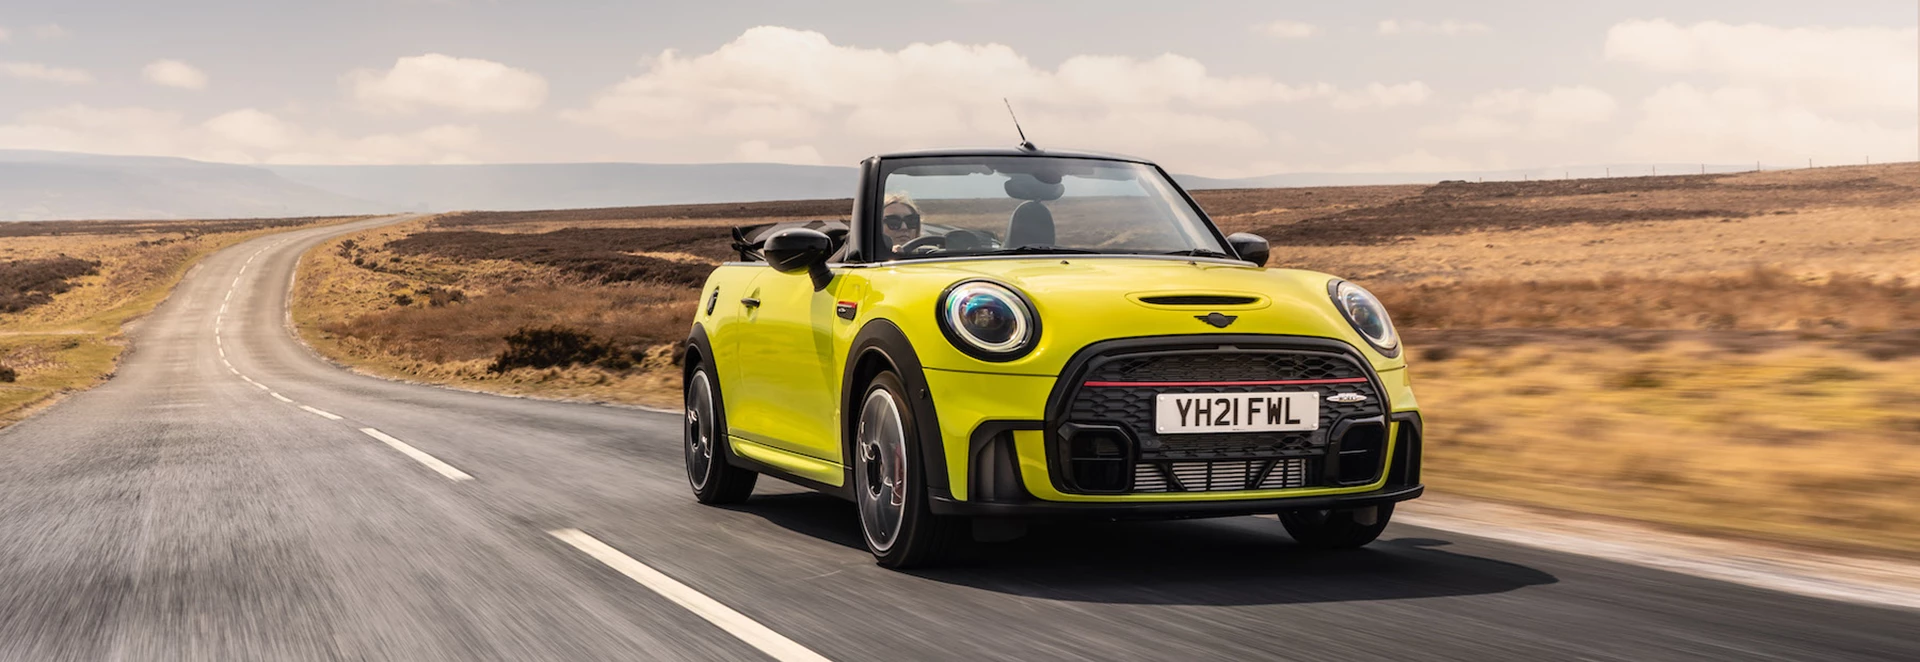 5 reasons why Mini Convertible is a great summer drop-top 